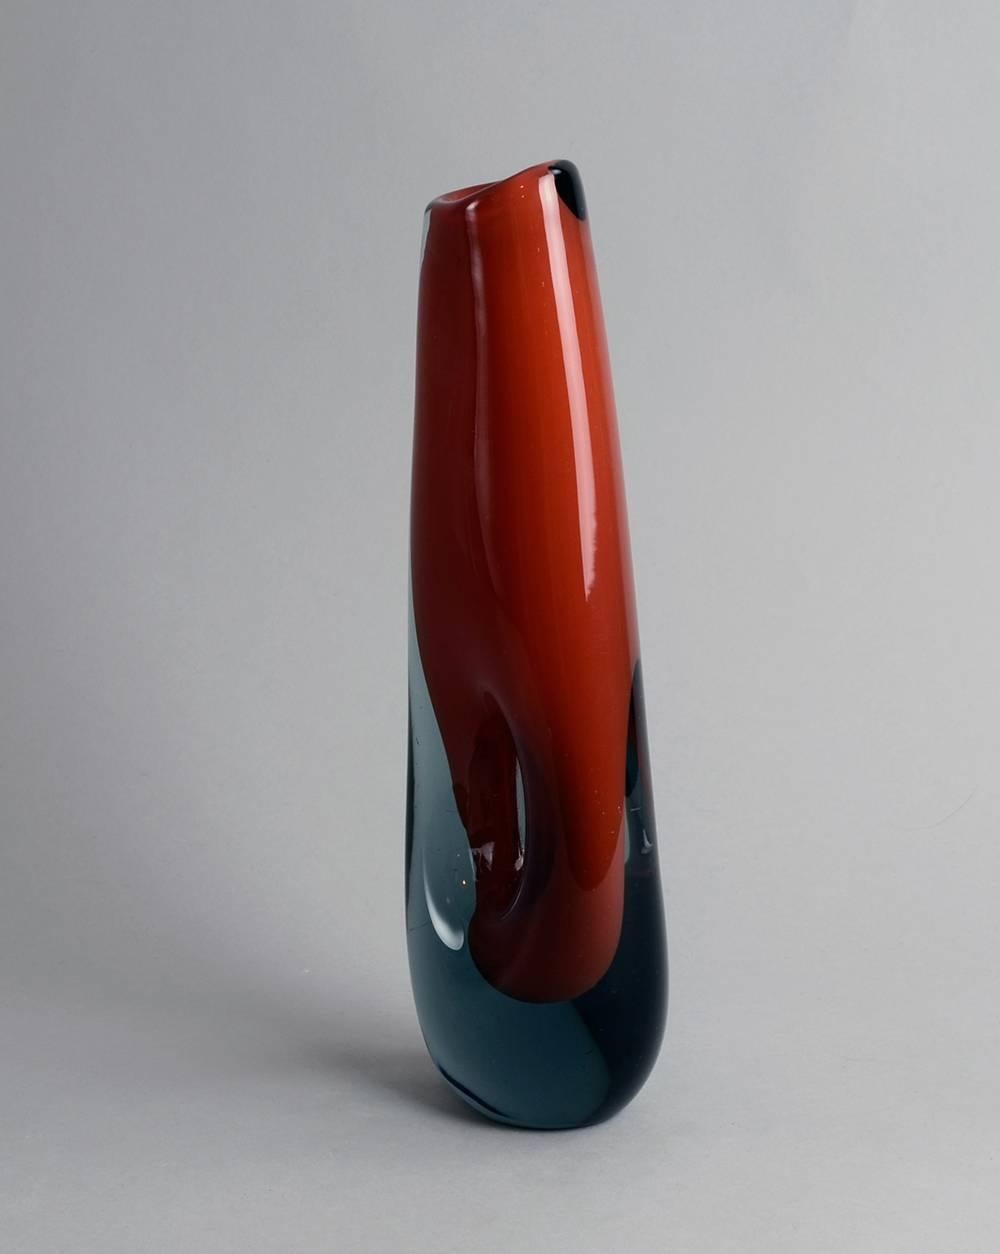 Scandinavian Modern Pierced Vase in Red and Gray Glass by Vicke Lindstrand for Kosta, Sweden, 1955 For Sale